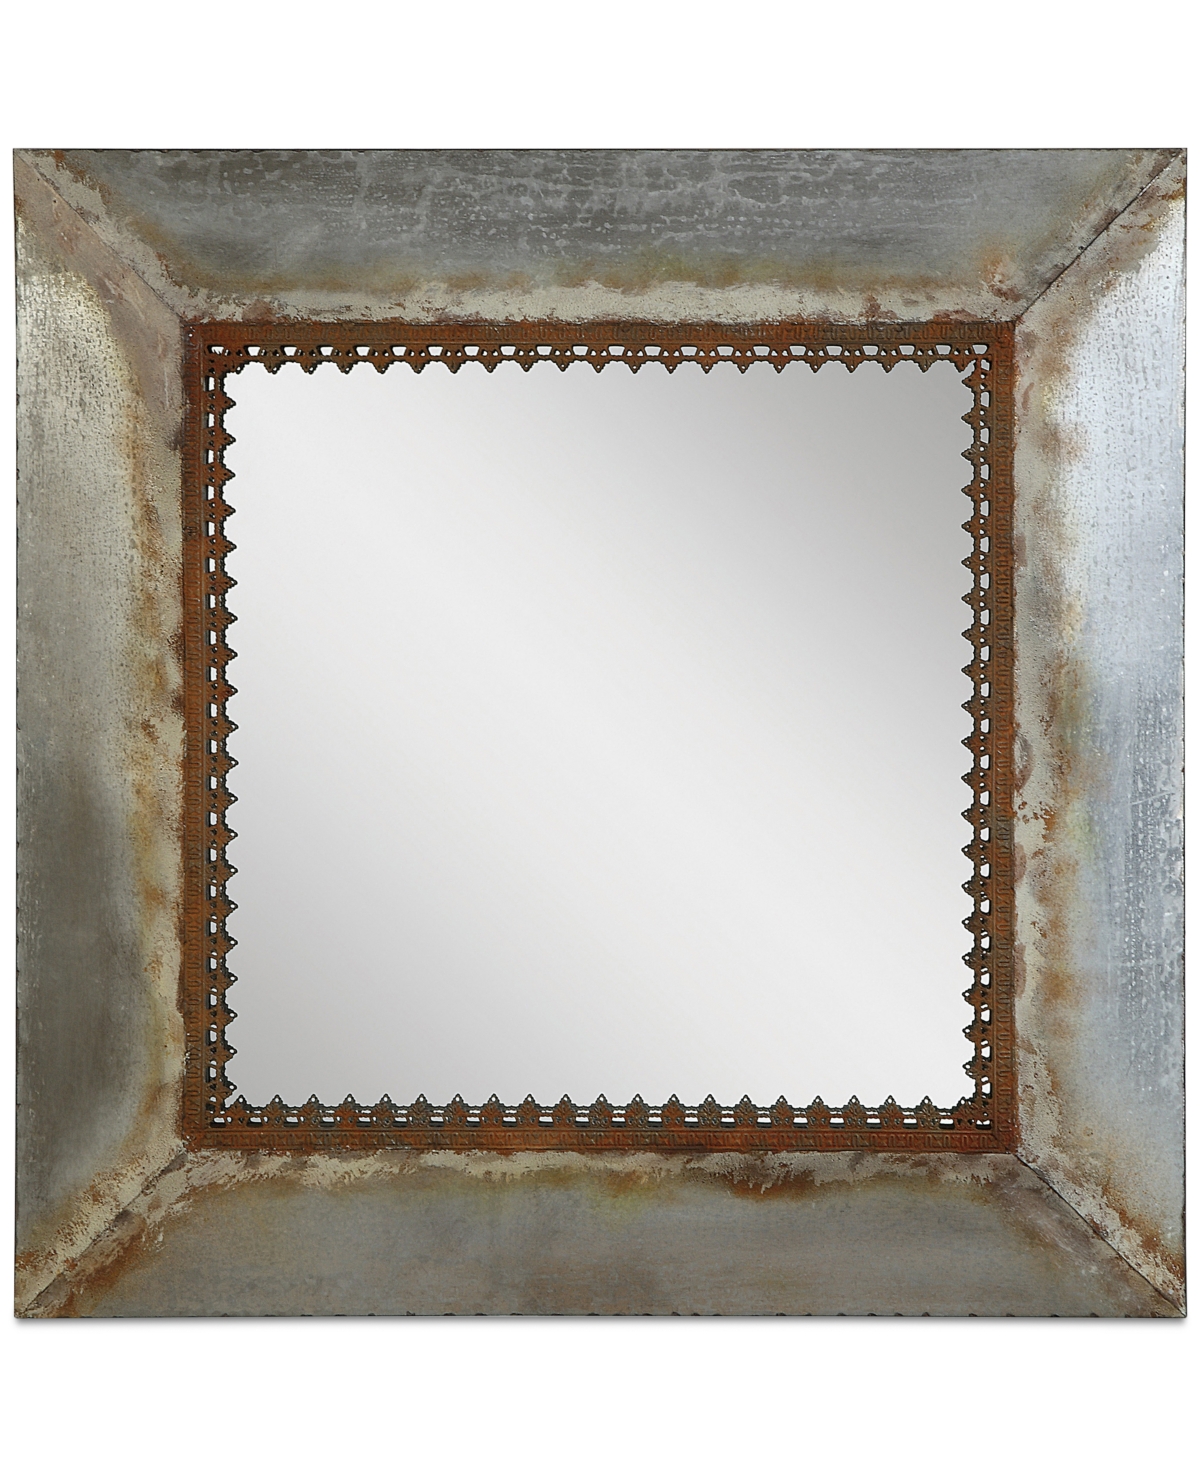 Square Metal-Framed Mirror - Silver